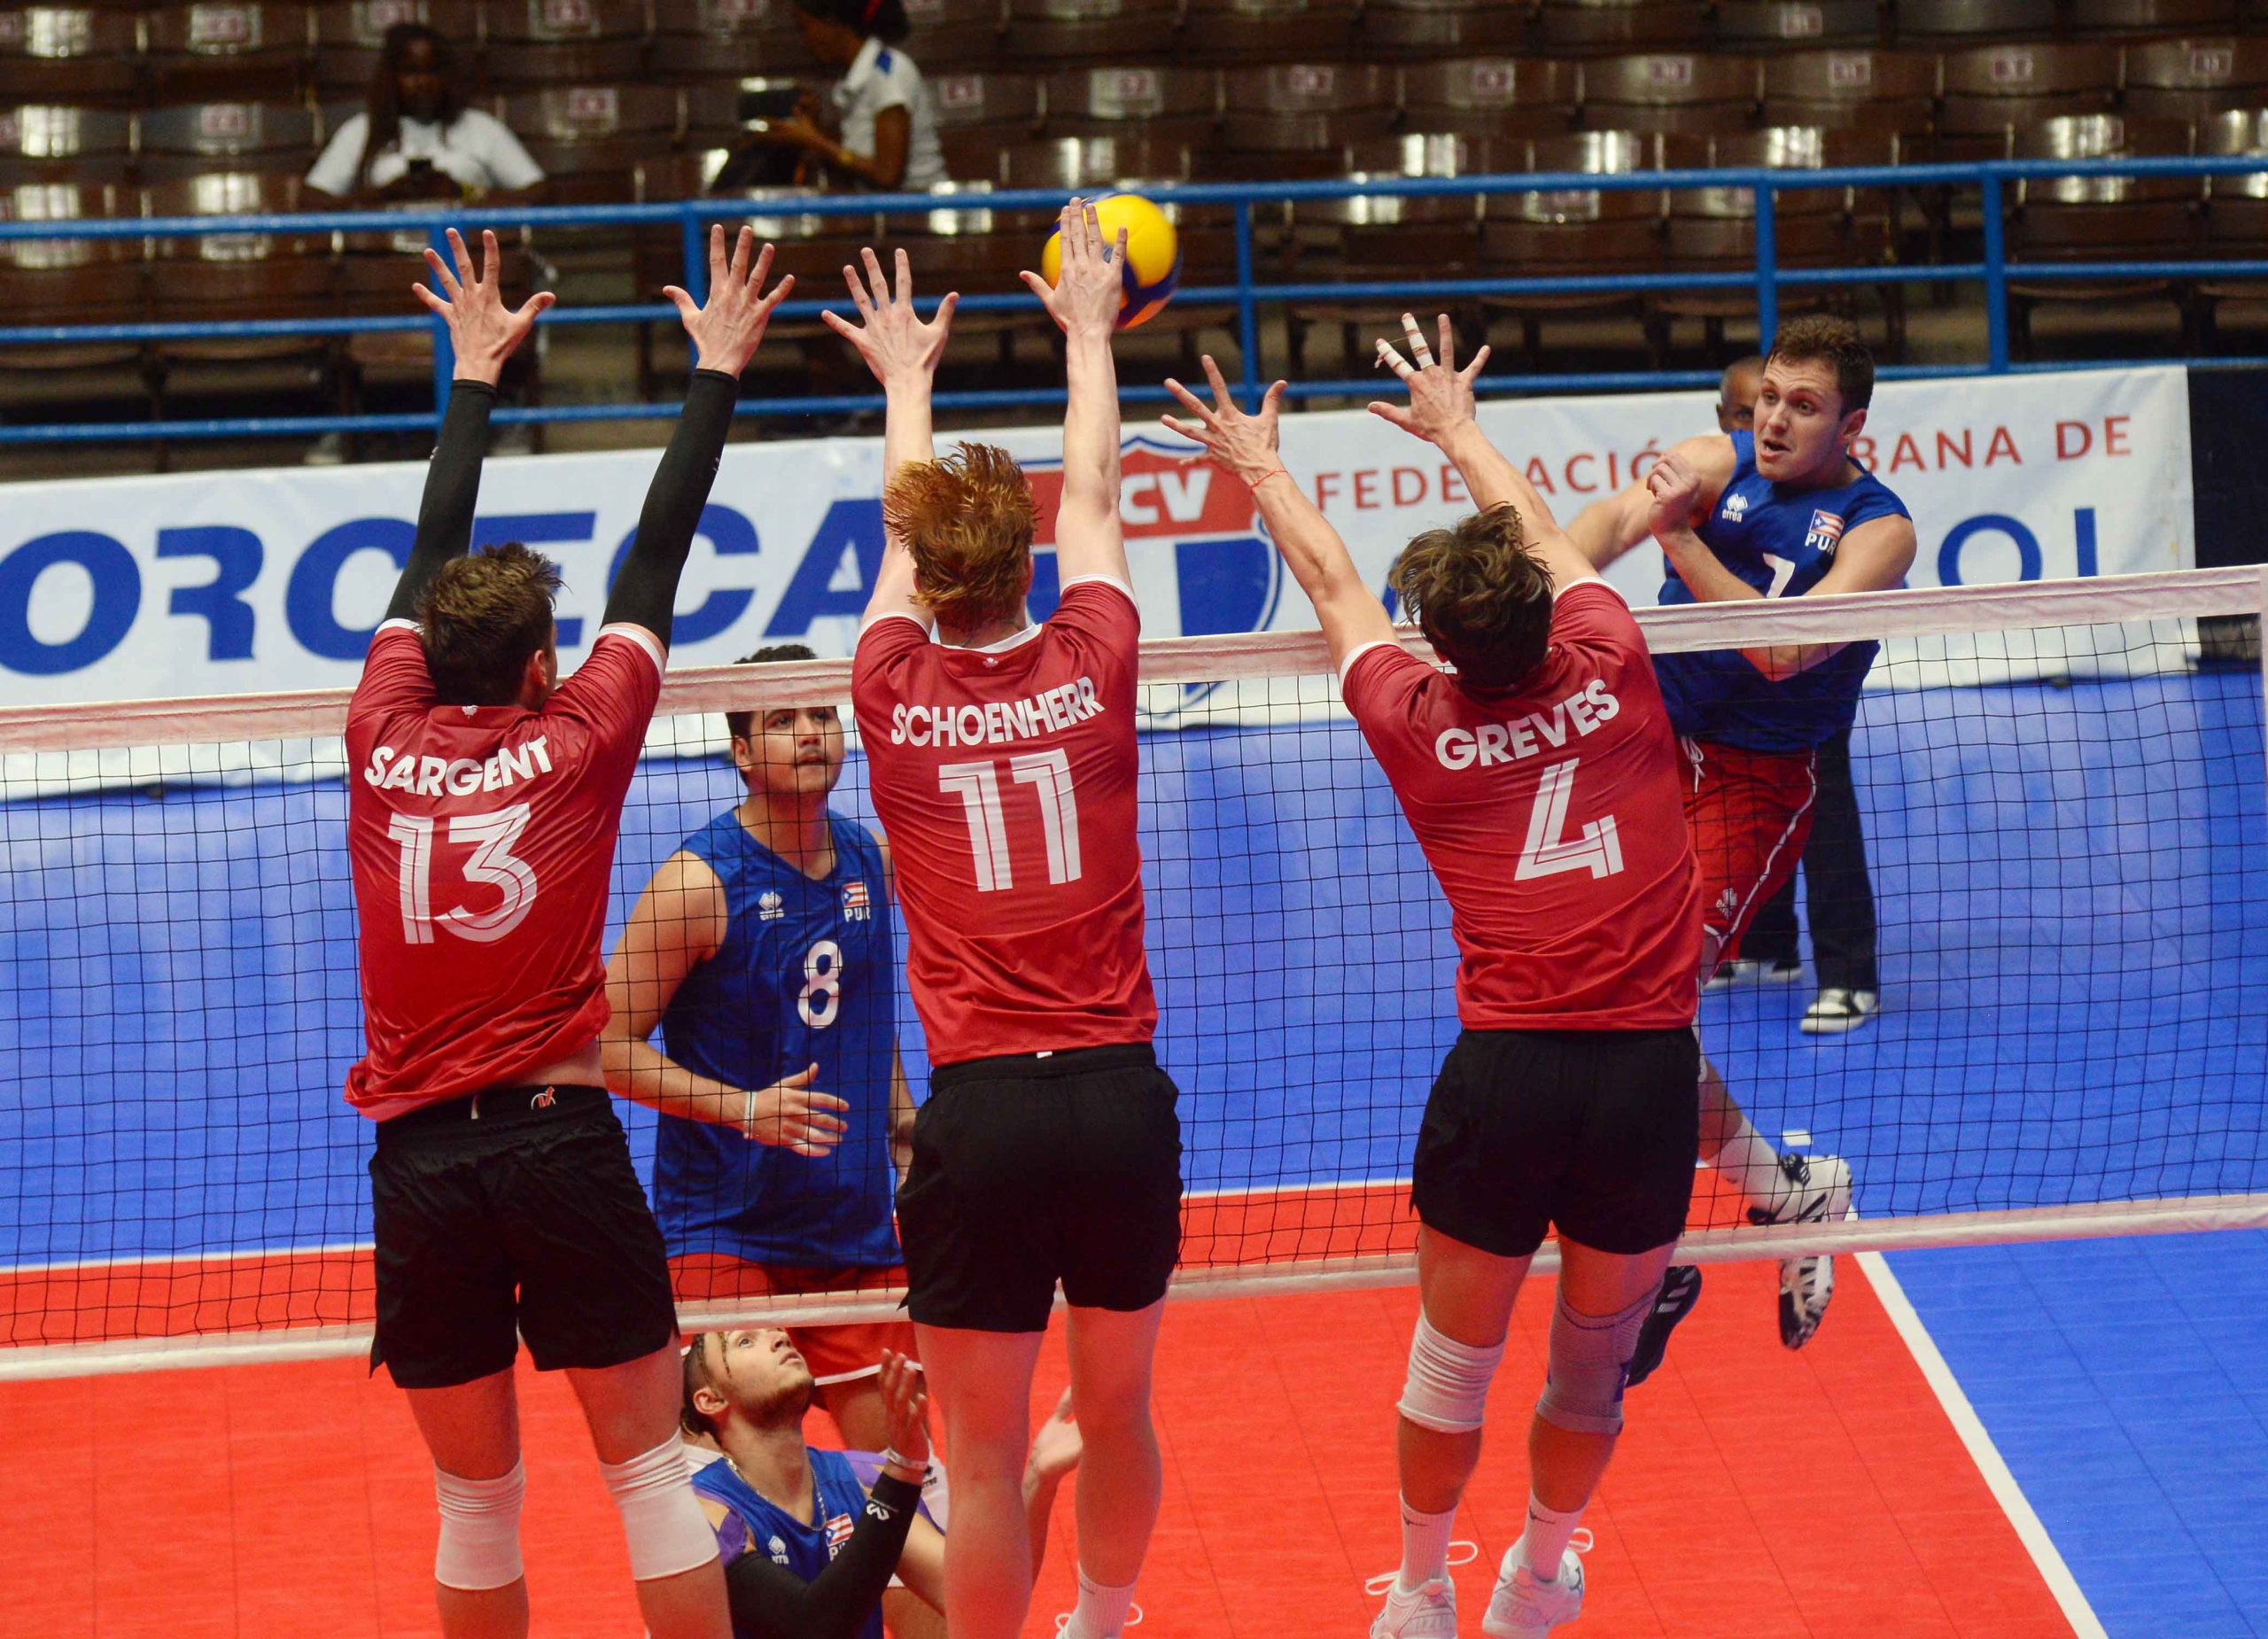 Canada won intense three-hour battle to Puerto Rico at U21 Pan American Cup